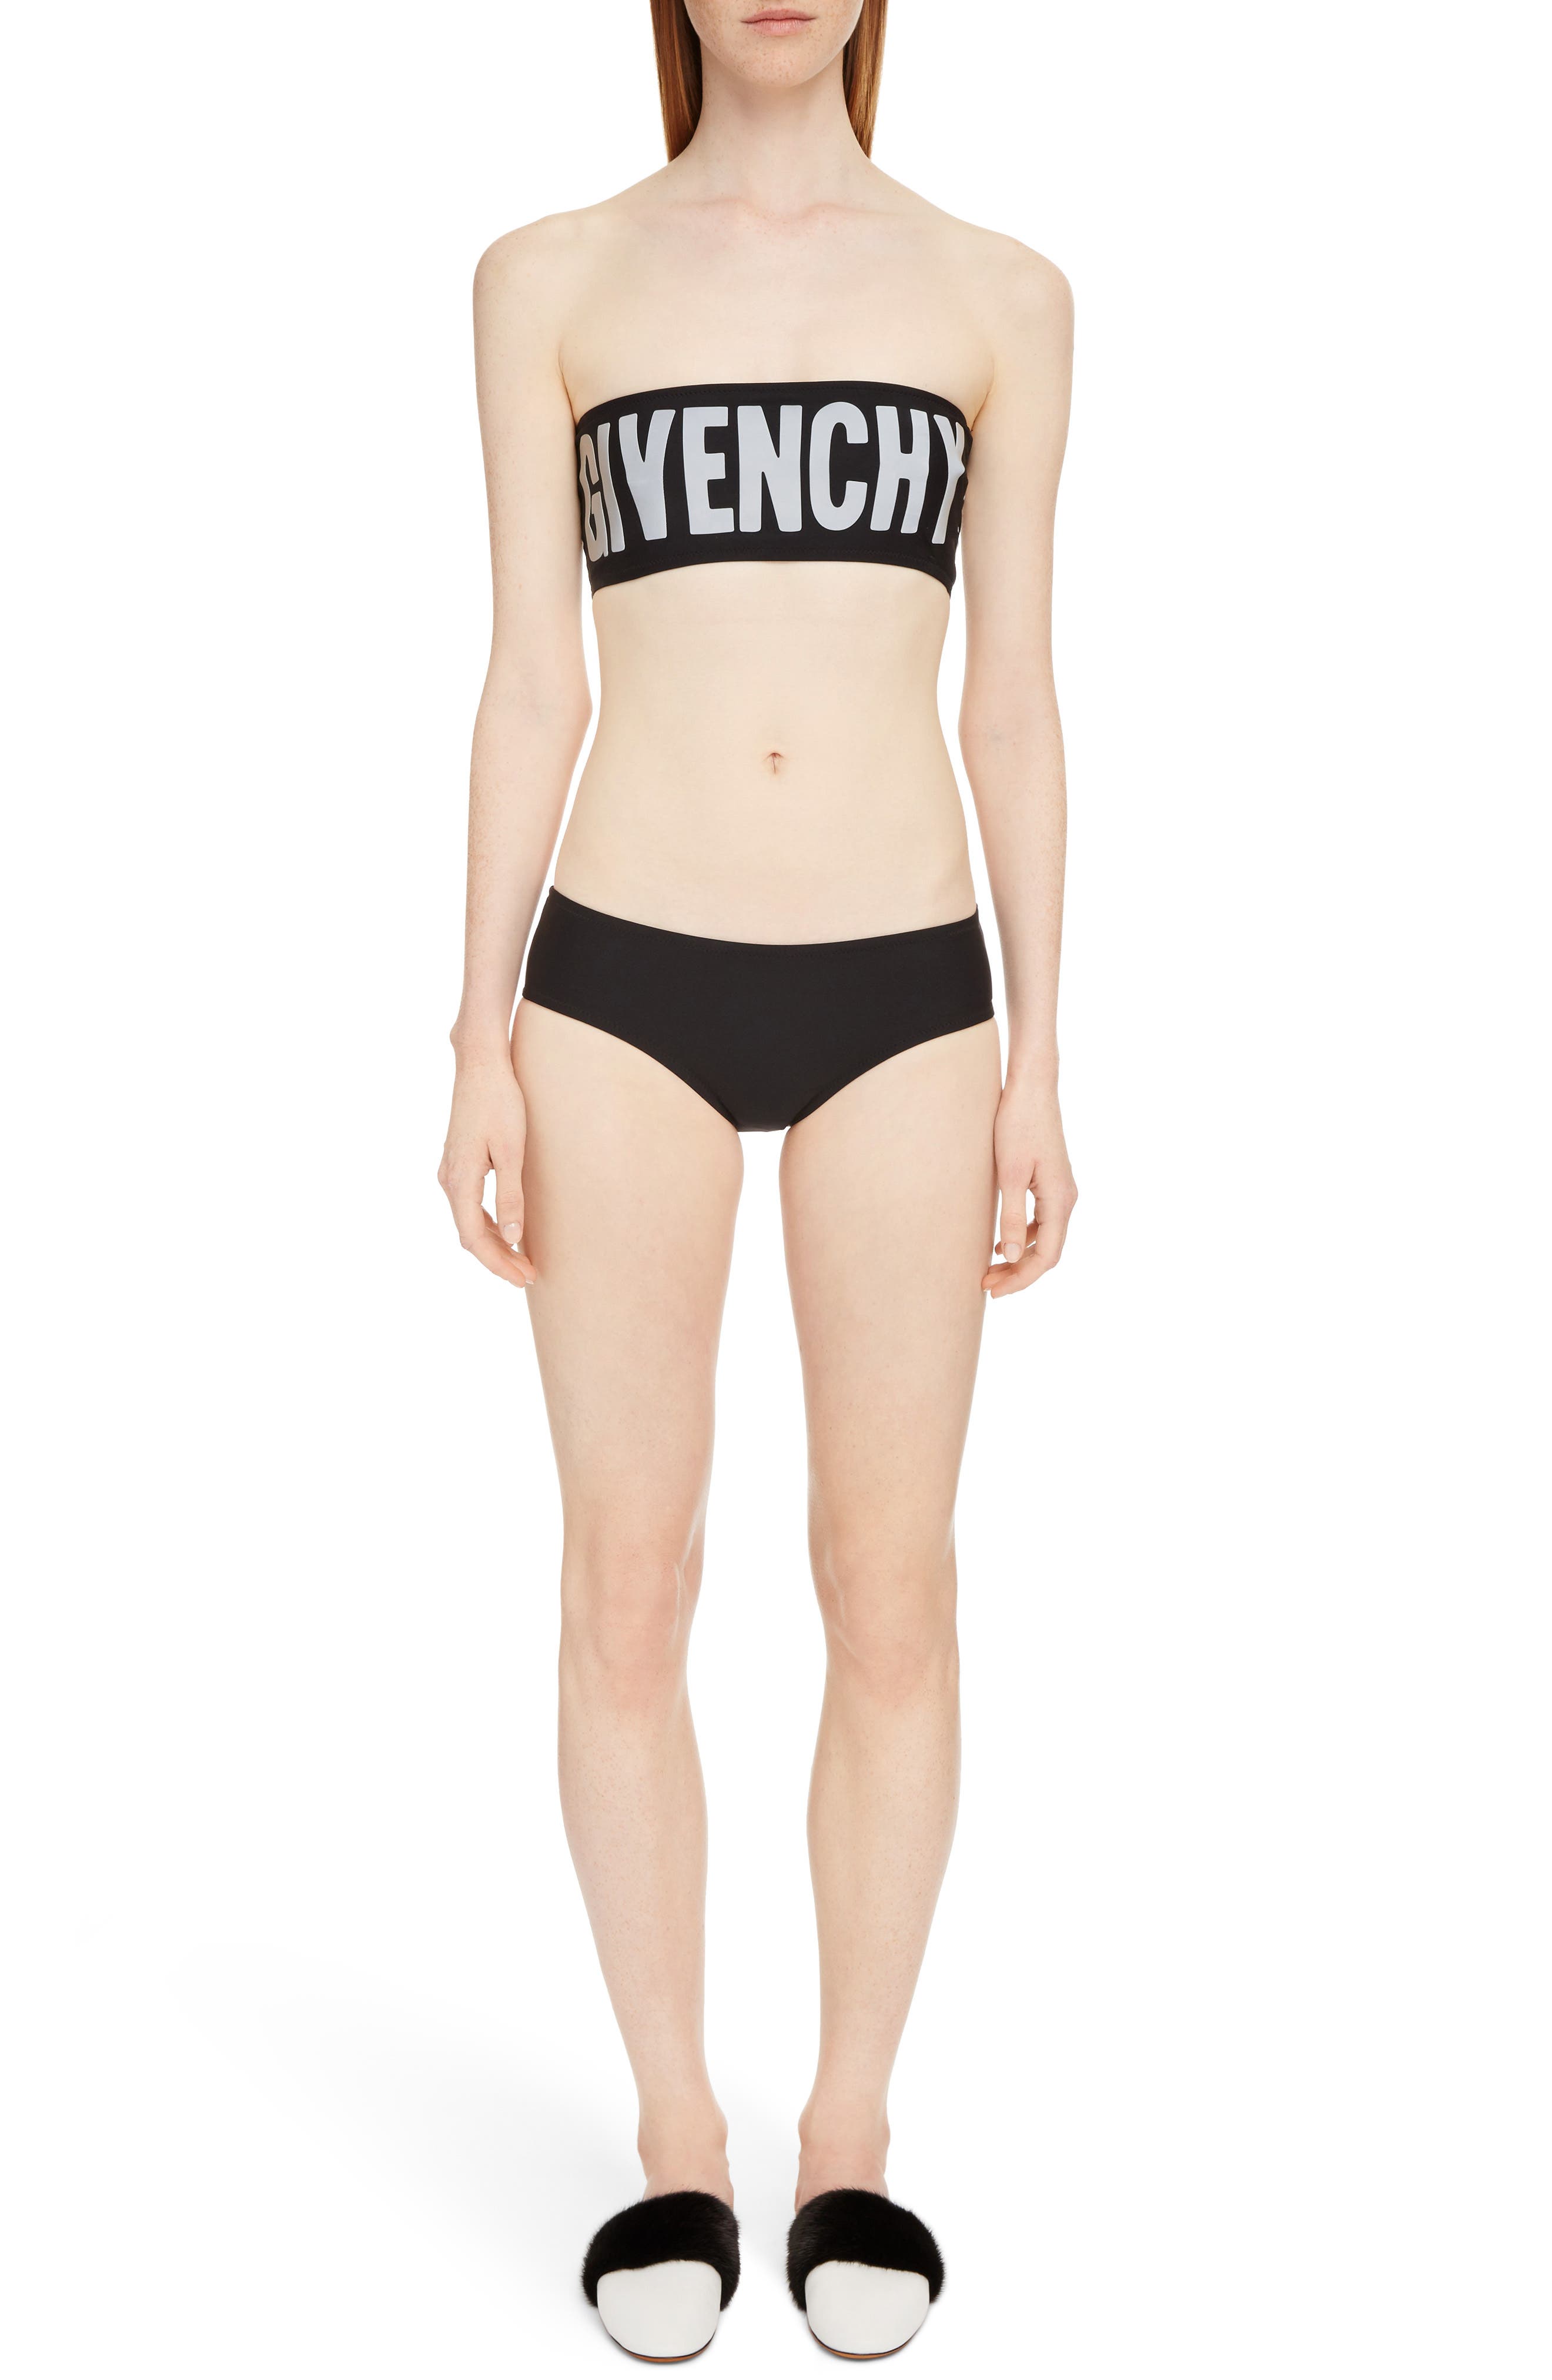 givenchy swimsuit